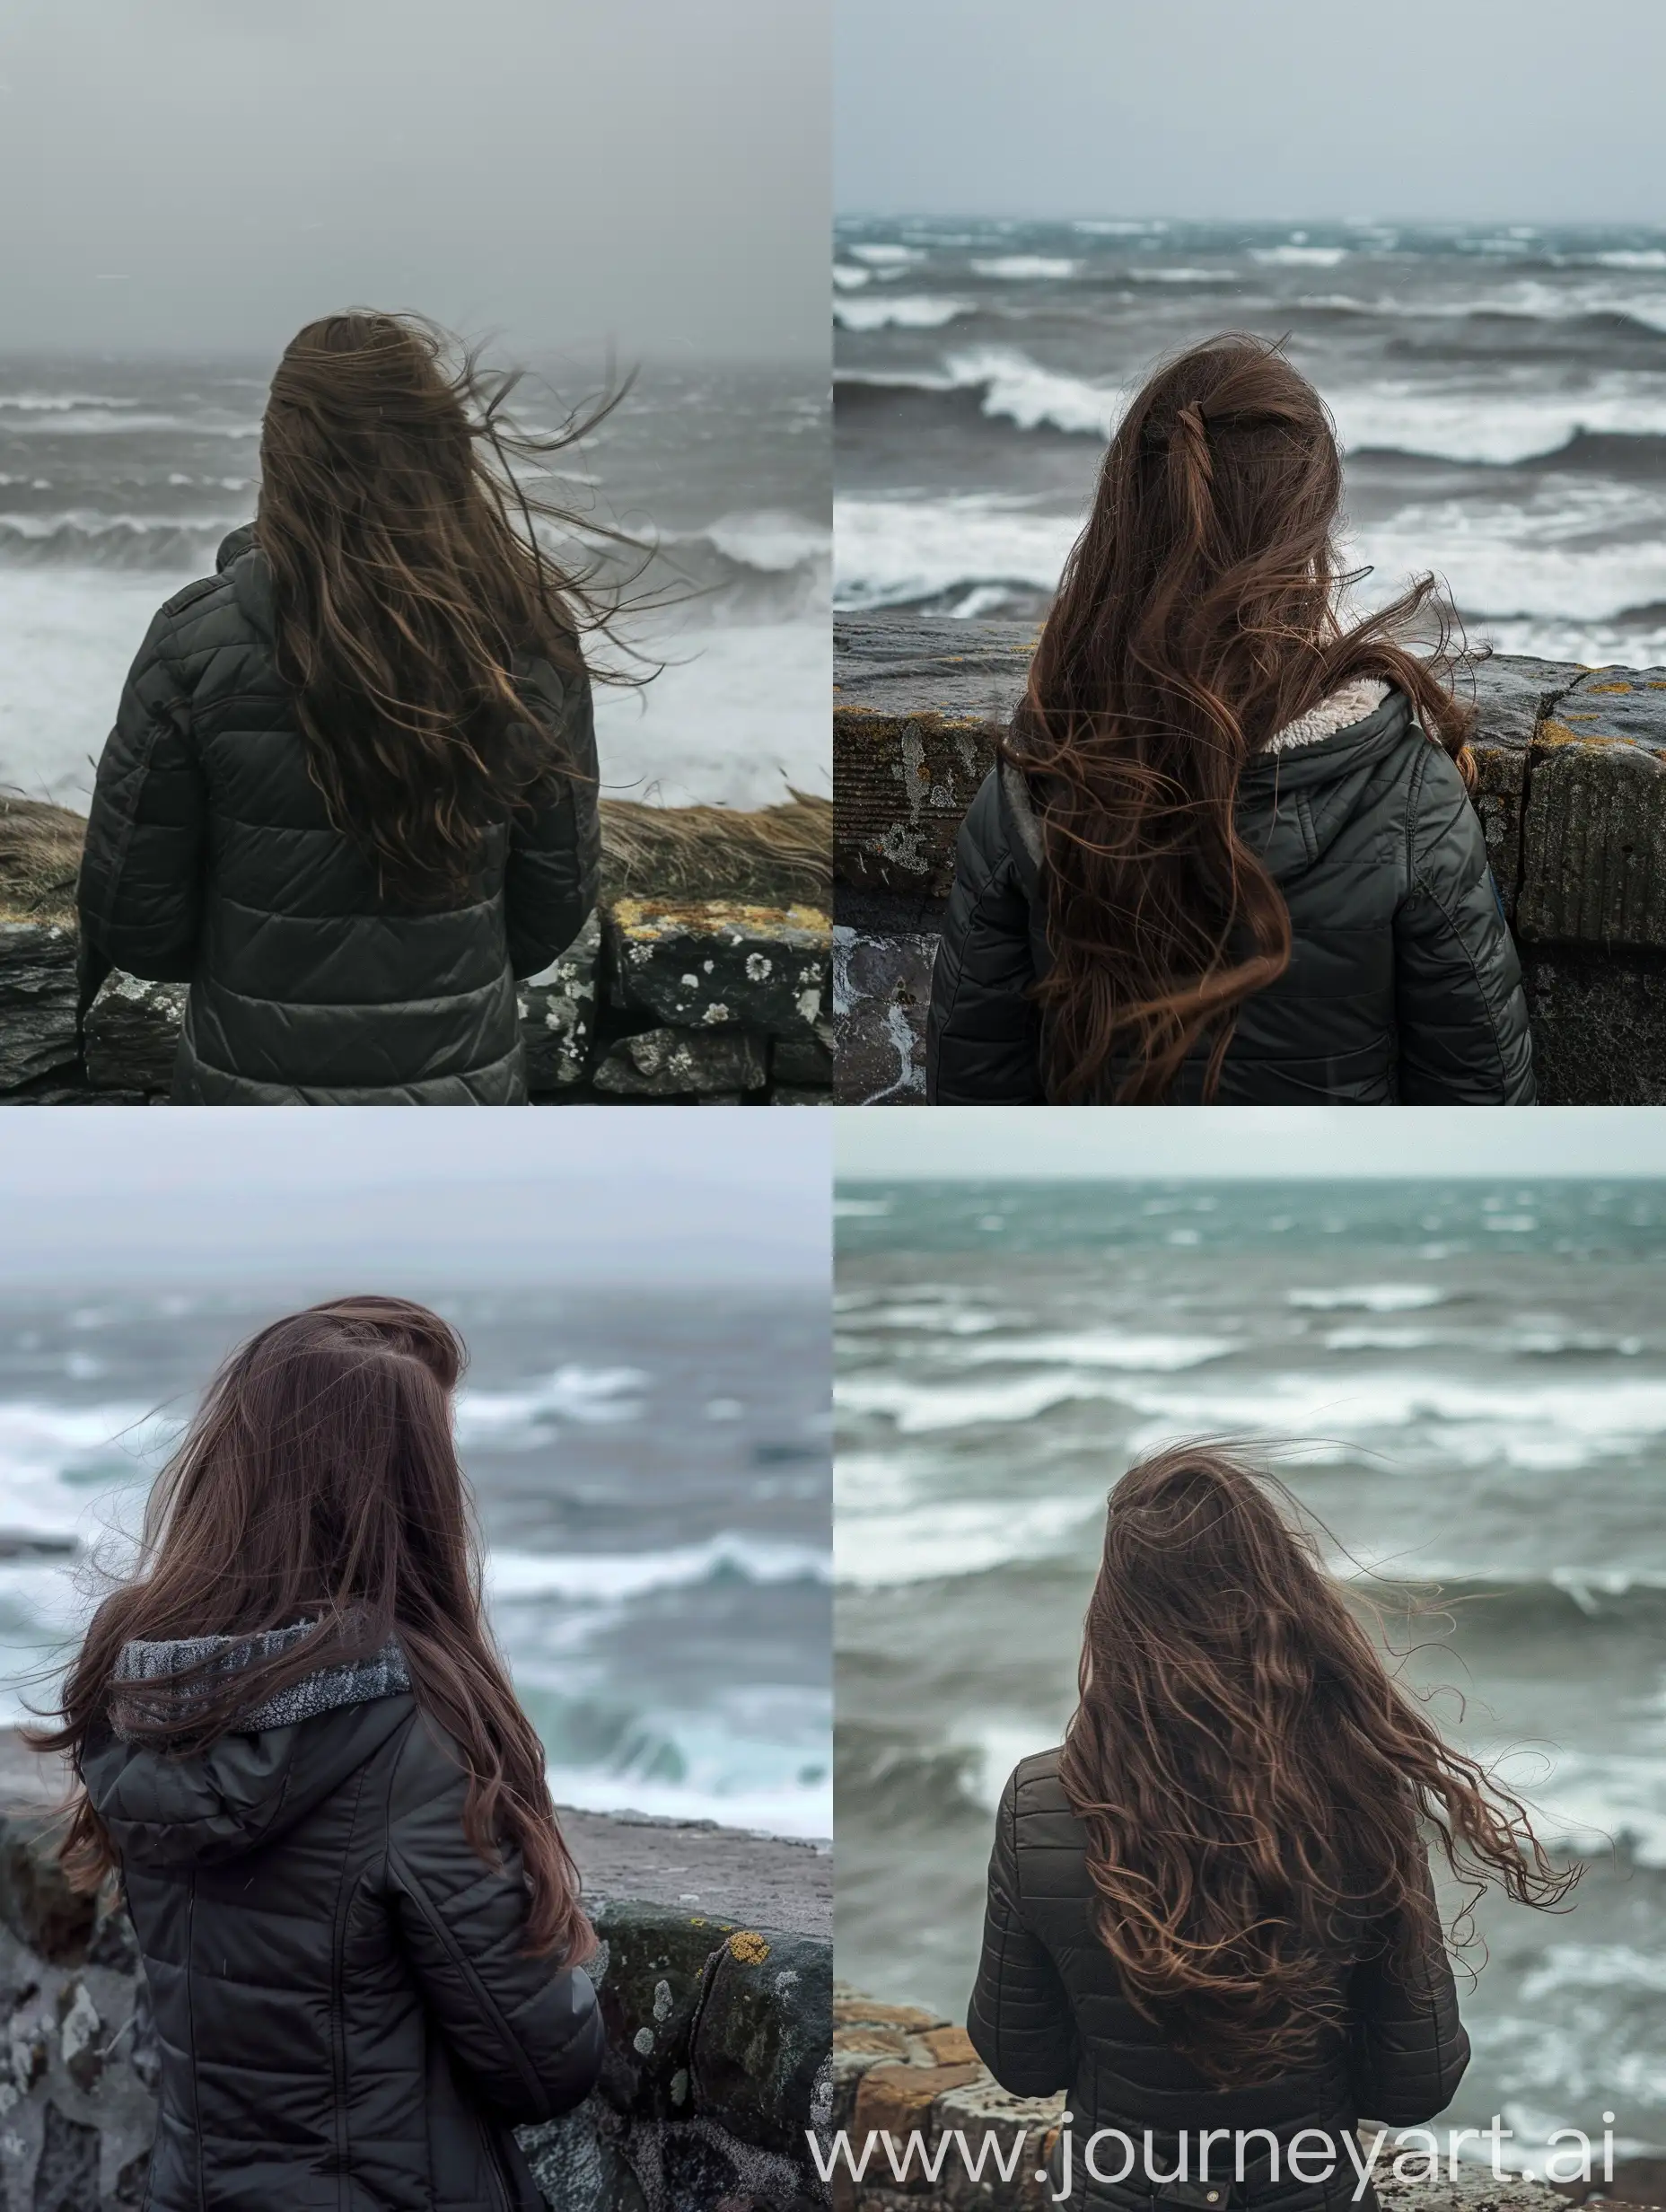 A girl, 35 years old, long brown hair, wearing winter jacket, starring at the wavy northern sea, wind is blowing, from the stone wall, photo from behind